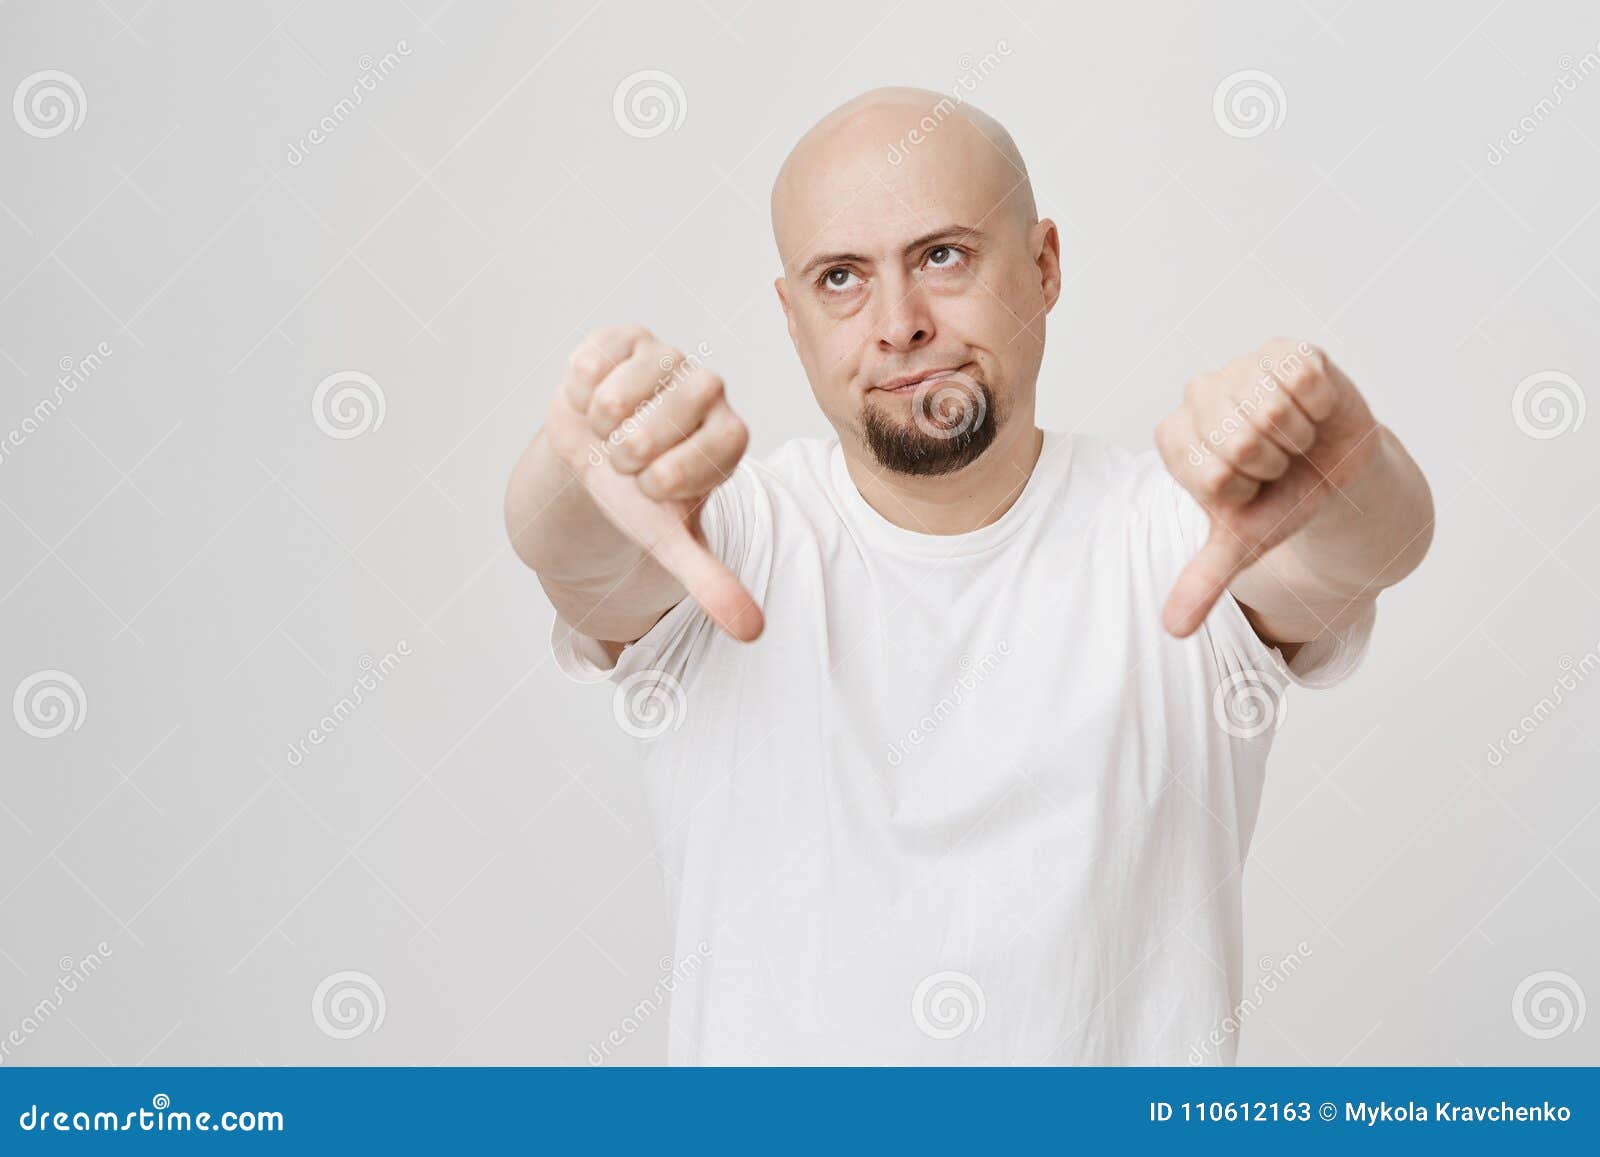 portrait of bothered annoyed bald caucasian bearded man showing thumbs down, giving negative opinion while rolling eyes